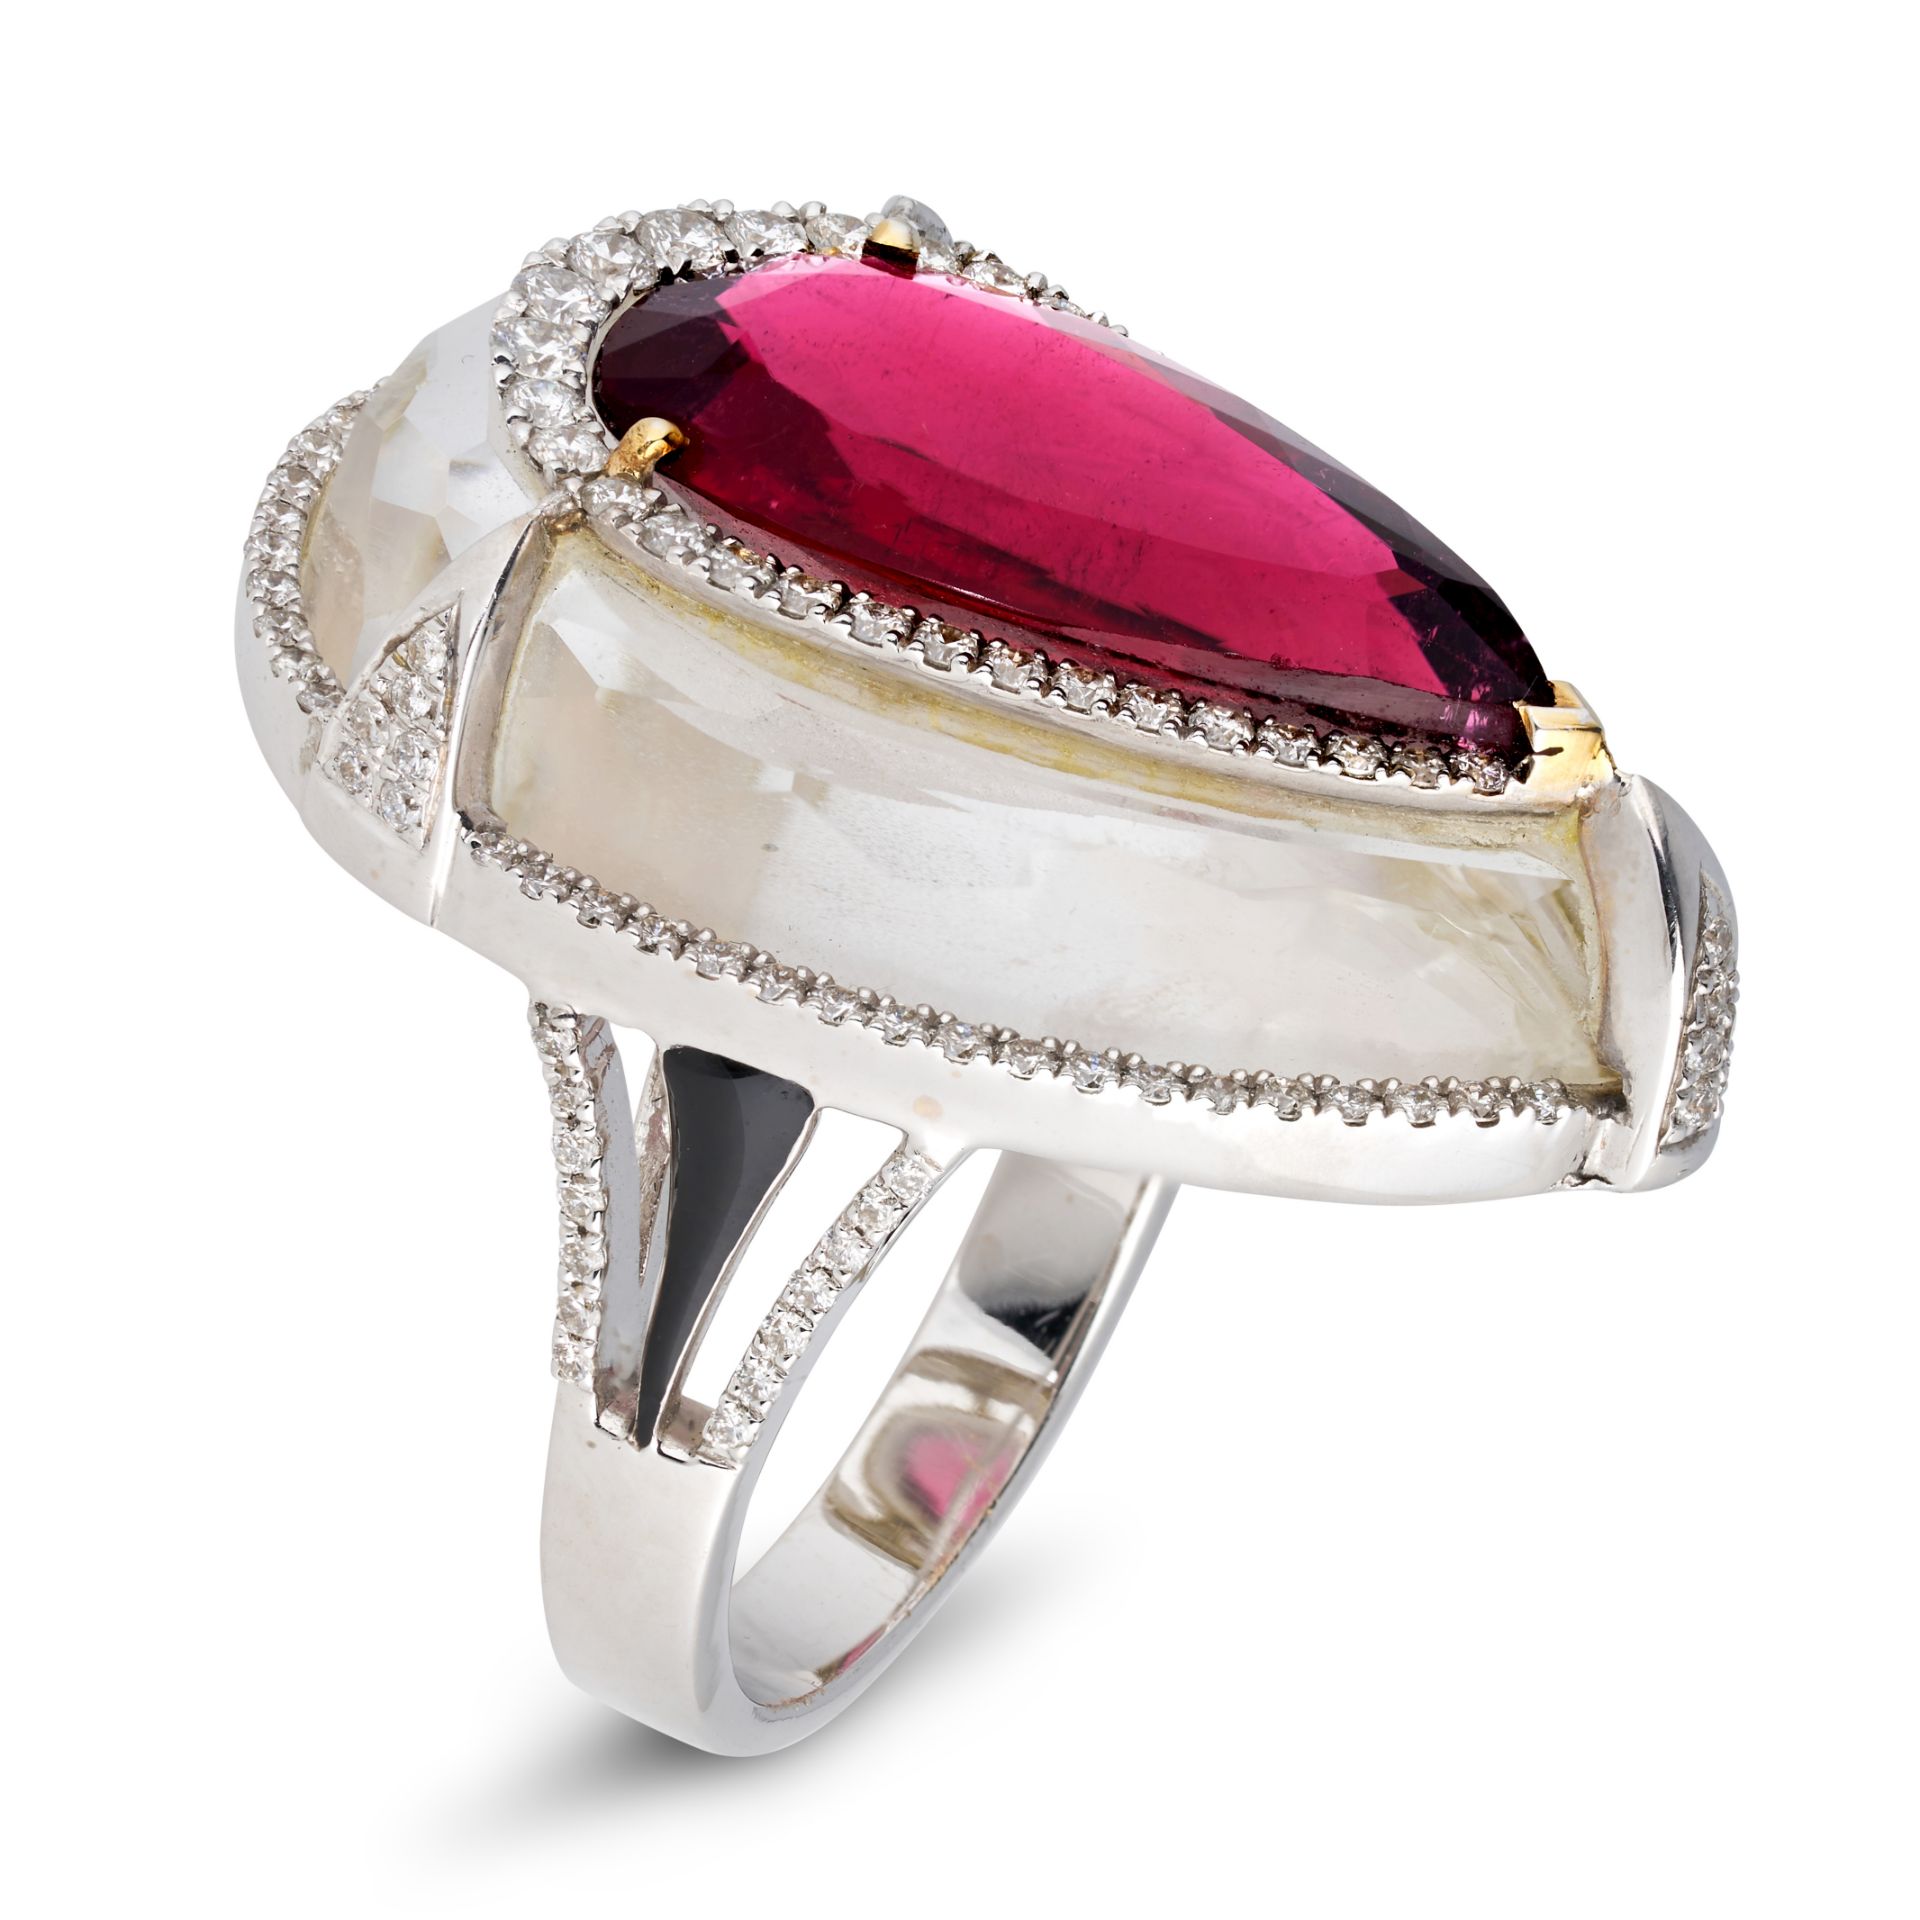 A RUBELLITE TOURMALINE, ROCK CRYSTAL AND DIAMOND DRESS RING in 18ct white gold, comprising a face... - Image 4 of 4